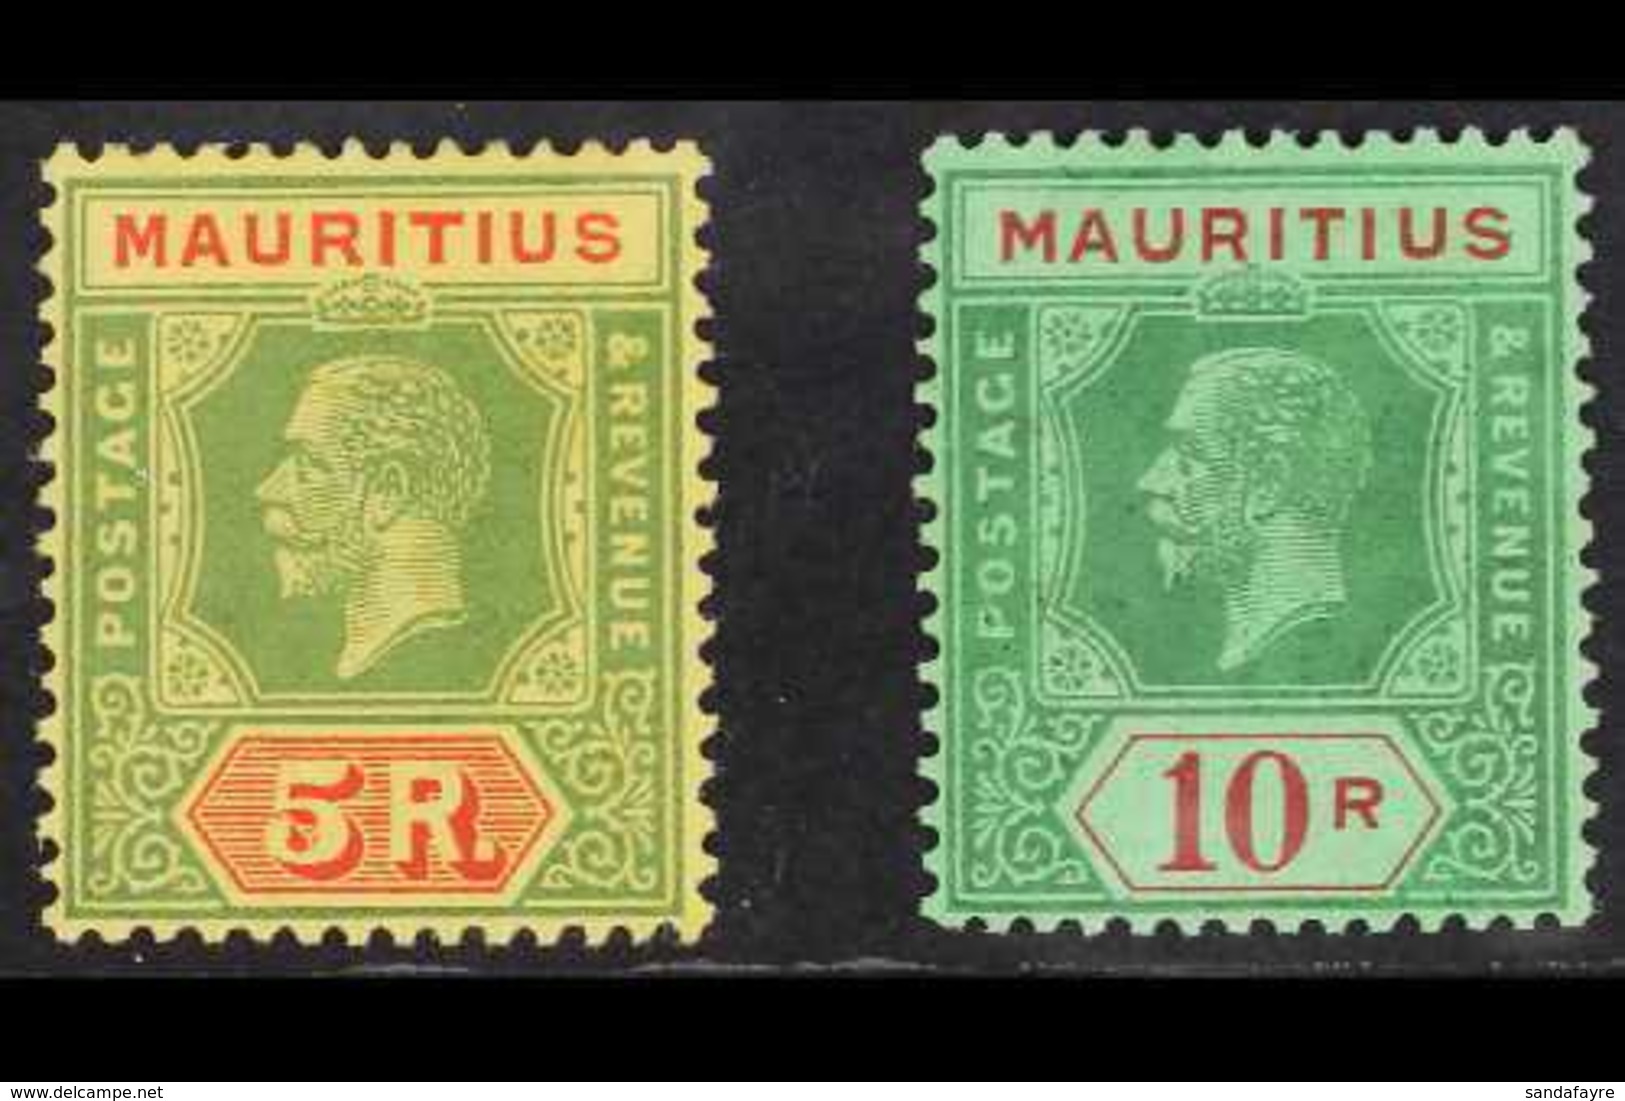 1921-34 5r And 10r Top Values, Die II, Watermark Multi Script CA, Fine Mint. (2 Stamps) For More Images, Please Visit Ht - Maurice (...-1967)